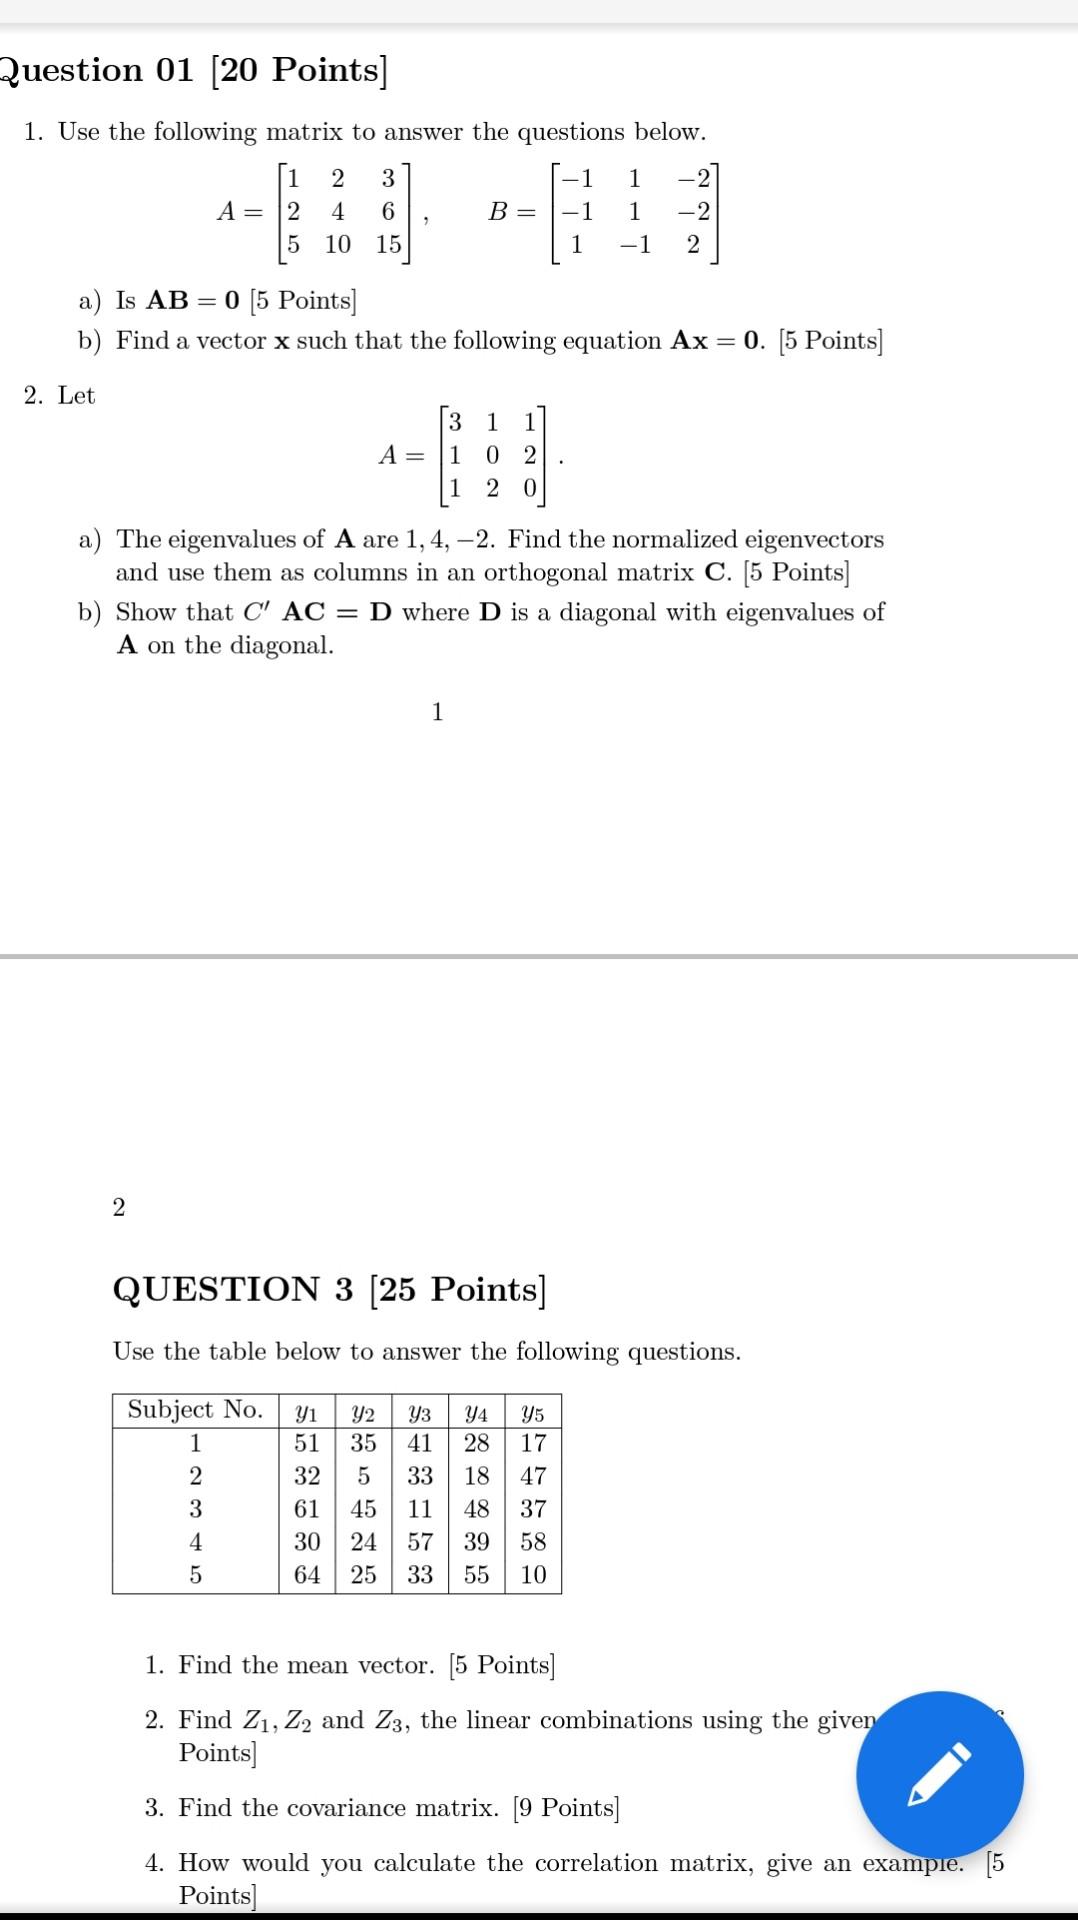 Question 01 20 Points 1 Use The Following Matrix To Answer The Questions Below 1 2 3 1 2 A 2 4 6 B 1 1 2 5 10 1